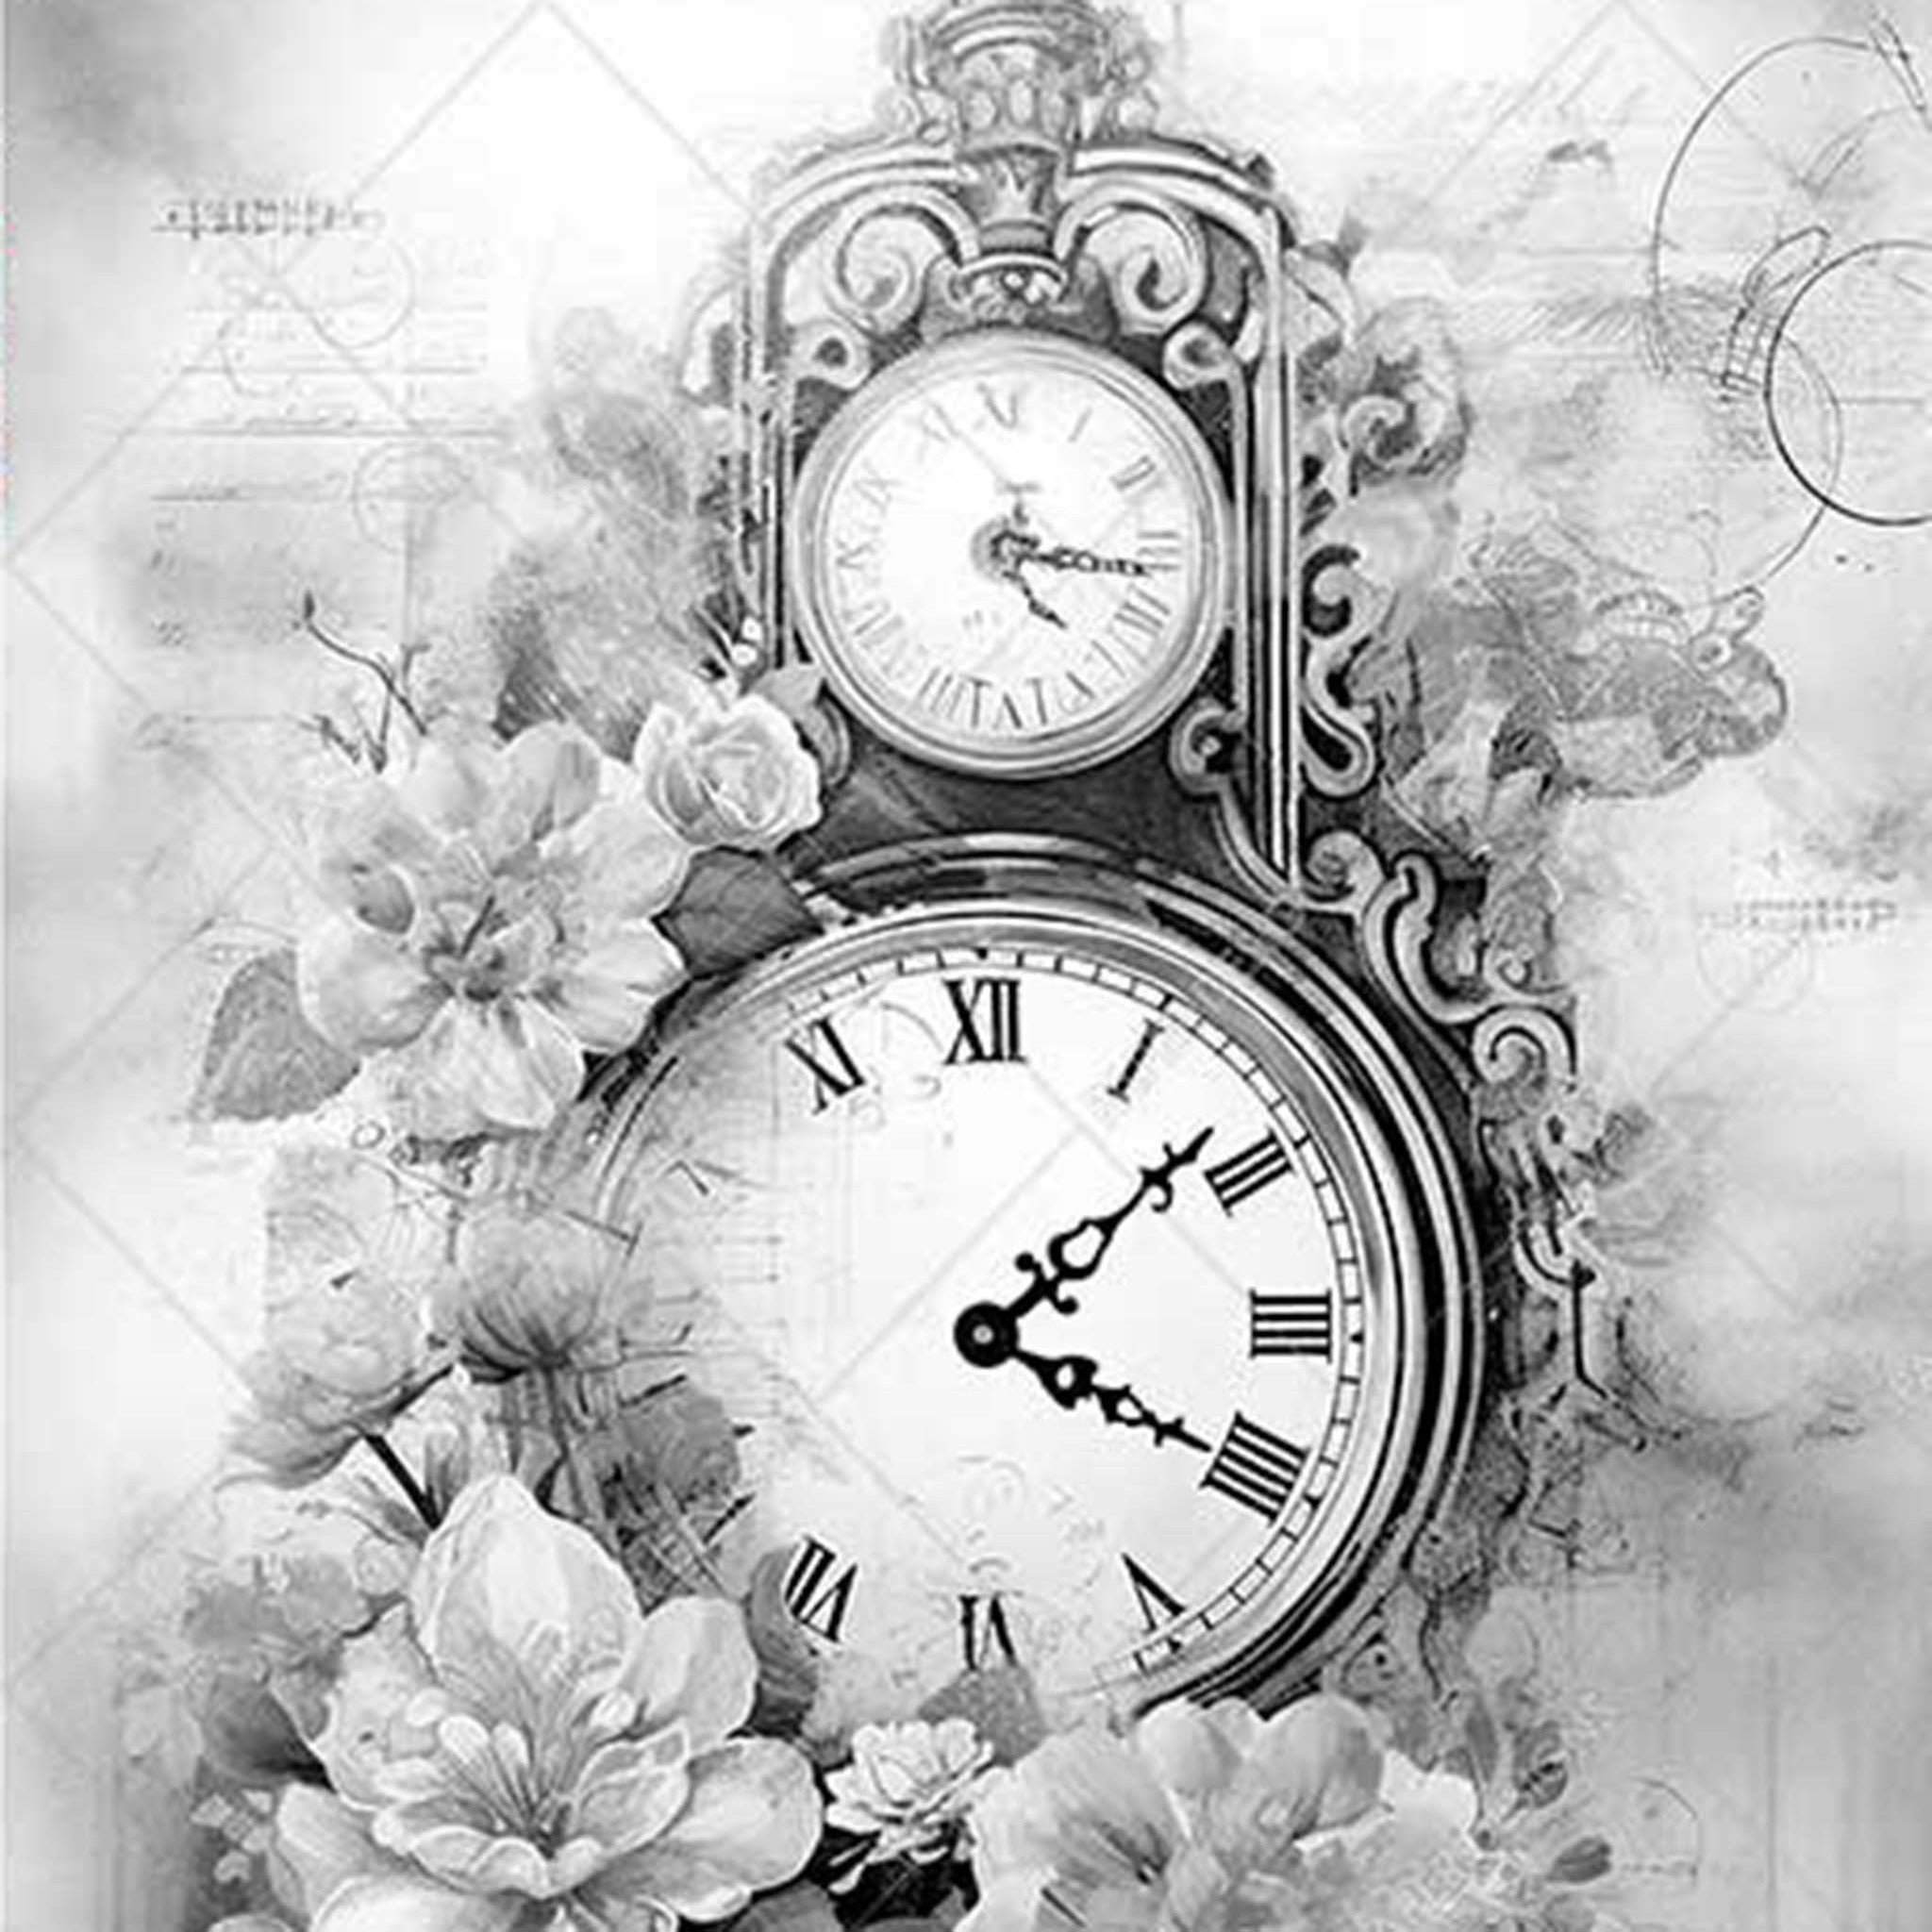 A3 rice paper design featuring a black and white image of an ornate clock surrounded by delicate flowers.